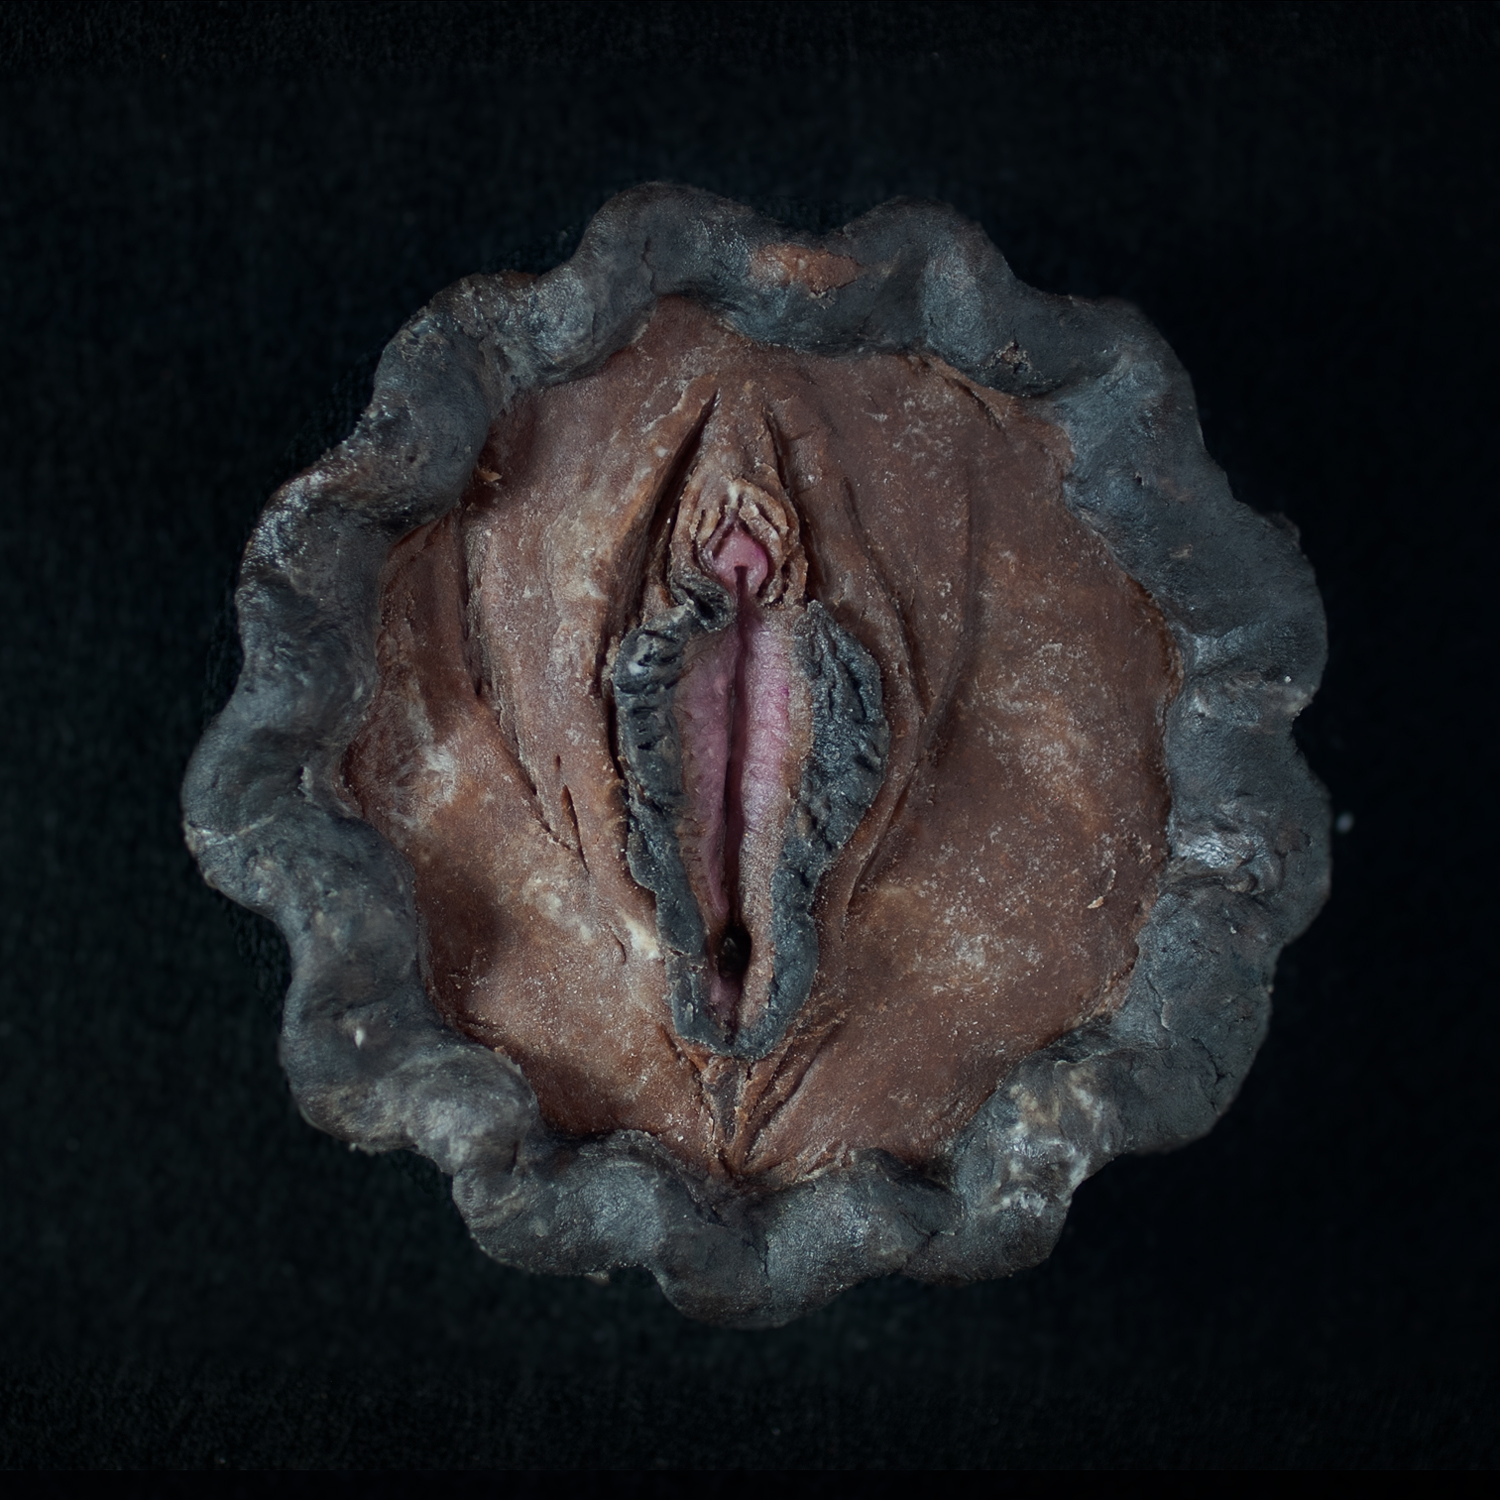 A real pie that has a top pie crust that looks like a Black vulva with hyper realistic details.